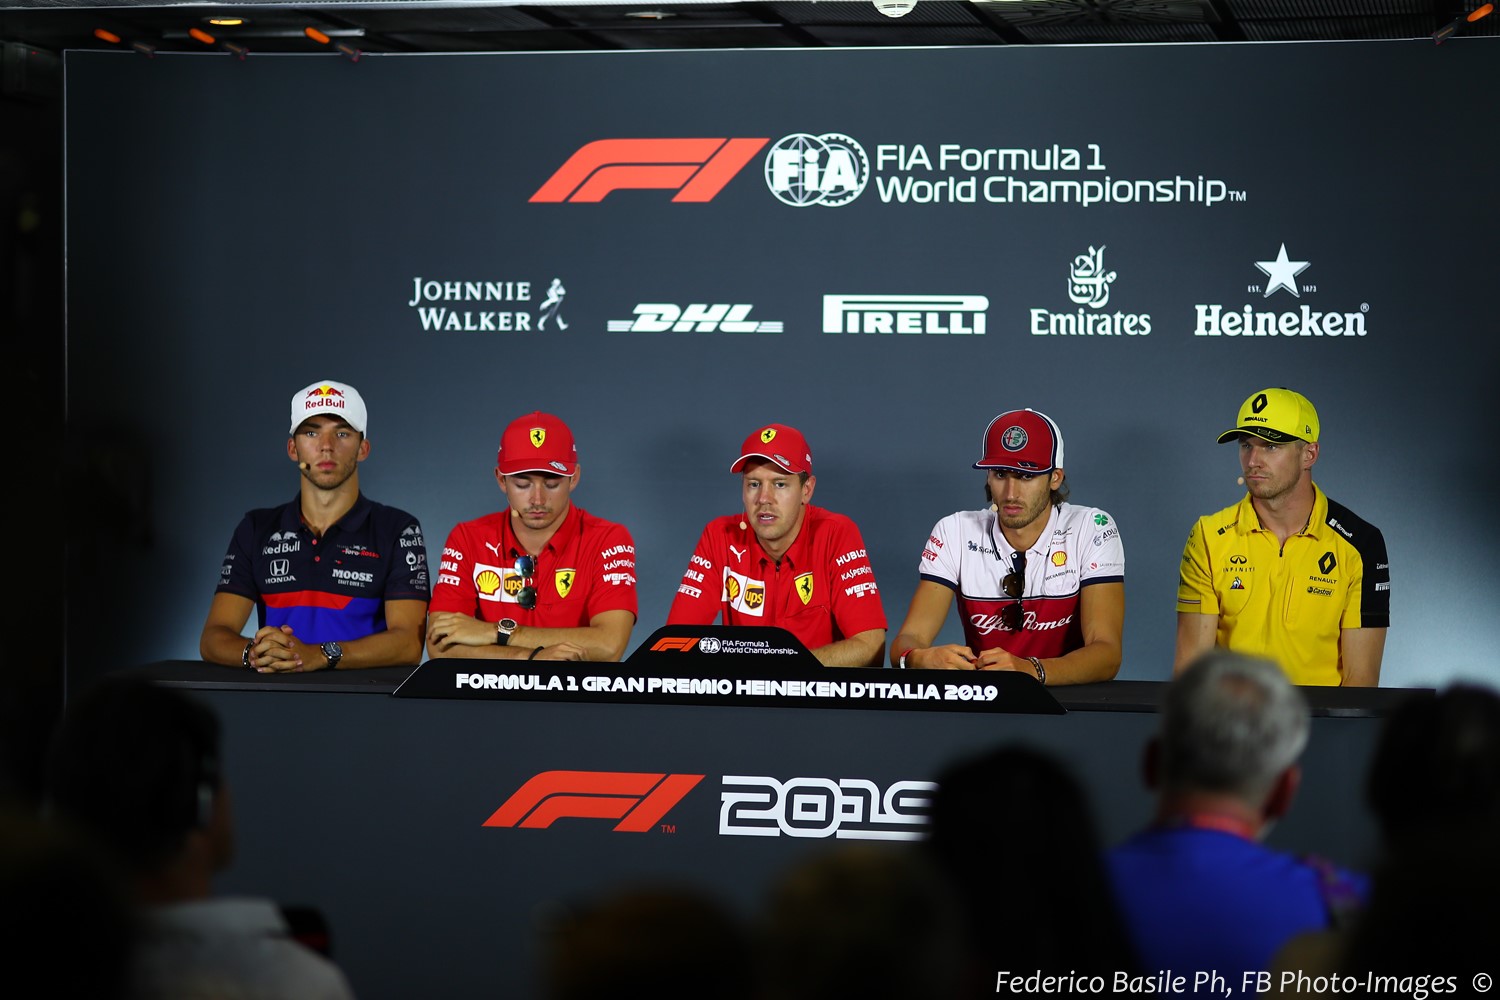 From left, Gasly, Leclerc, Vettel, Giovinazzi and Hulkenberg